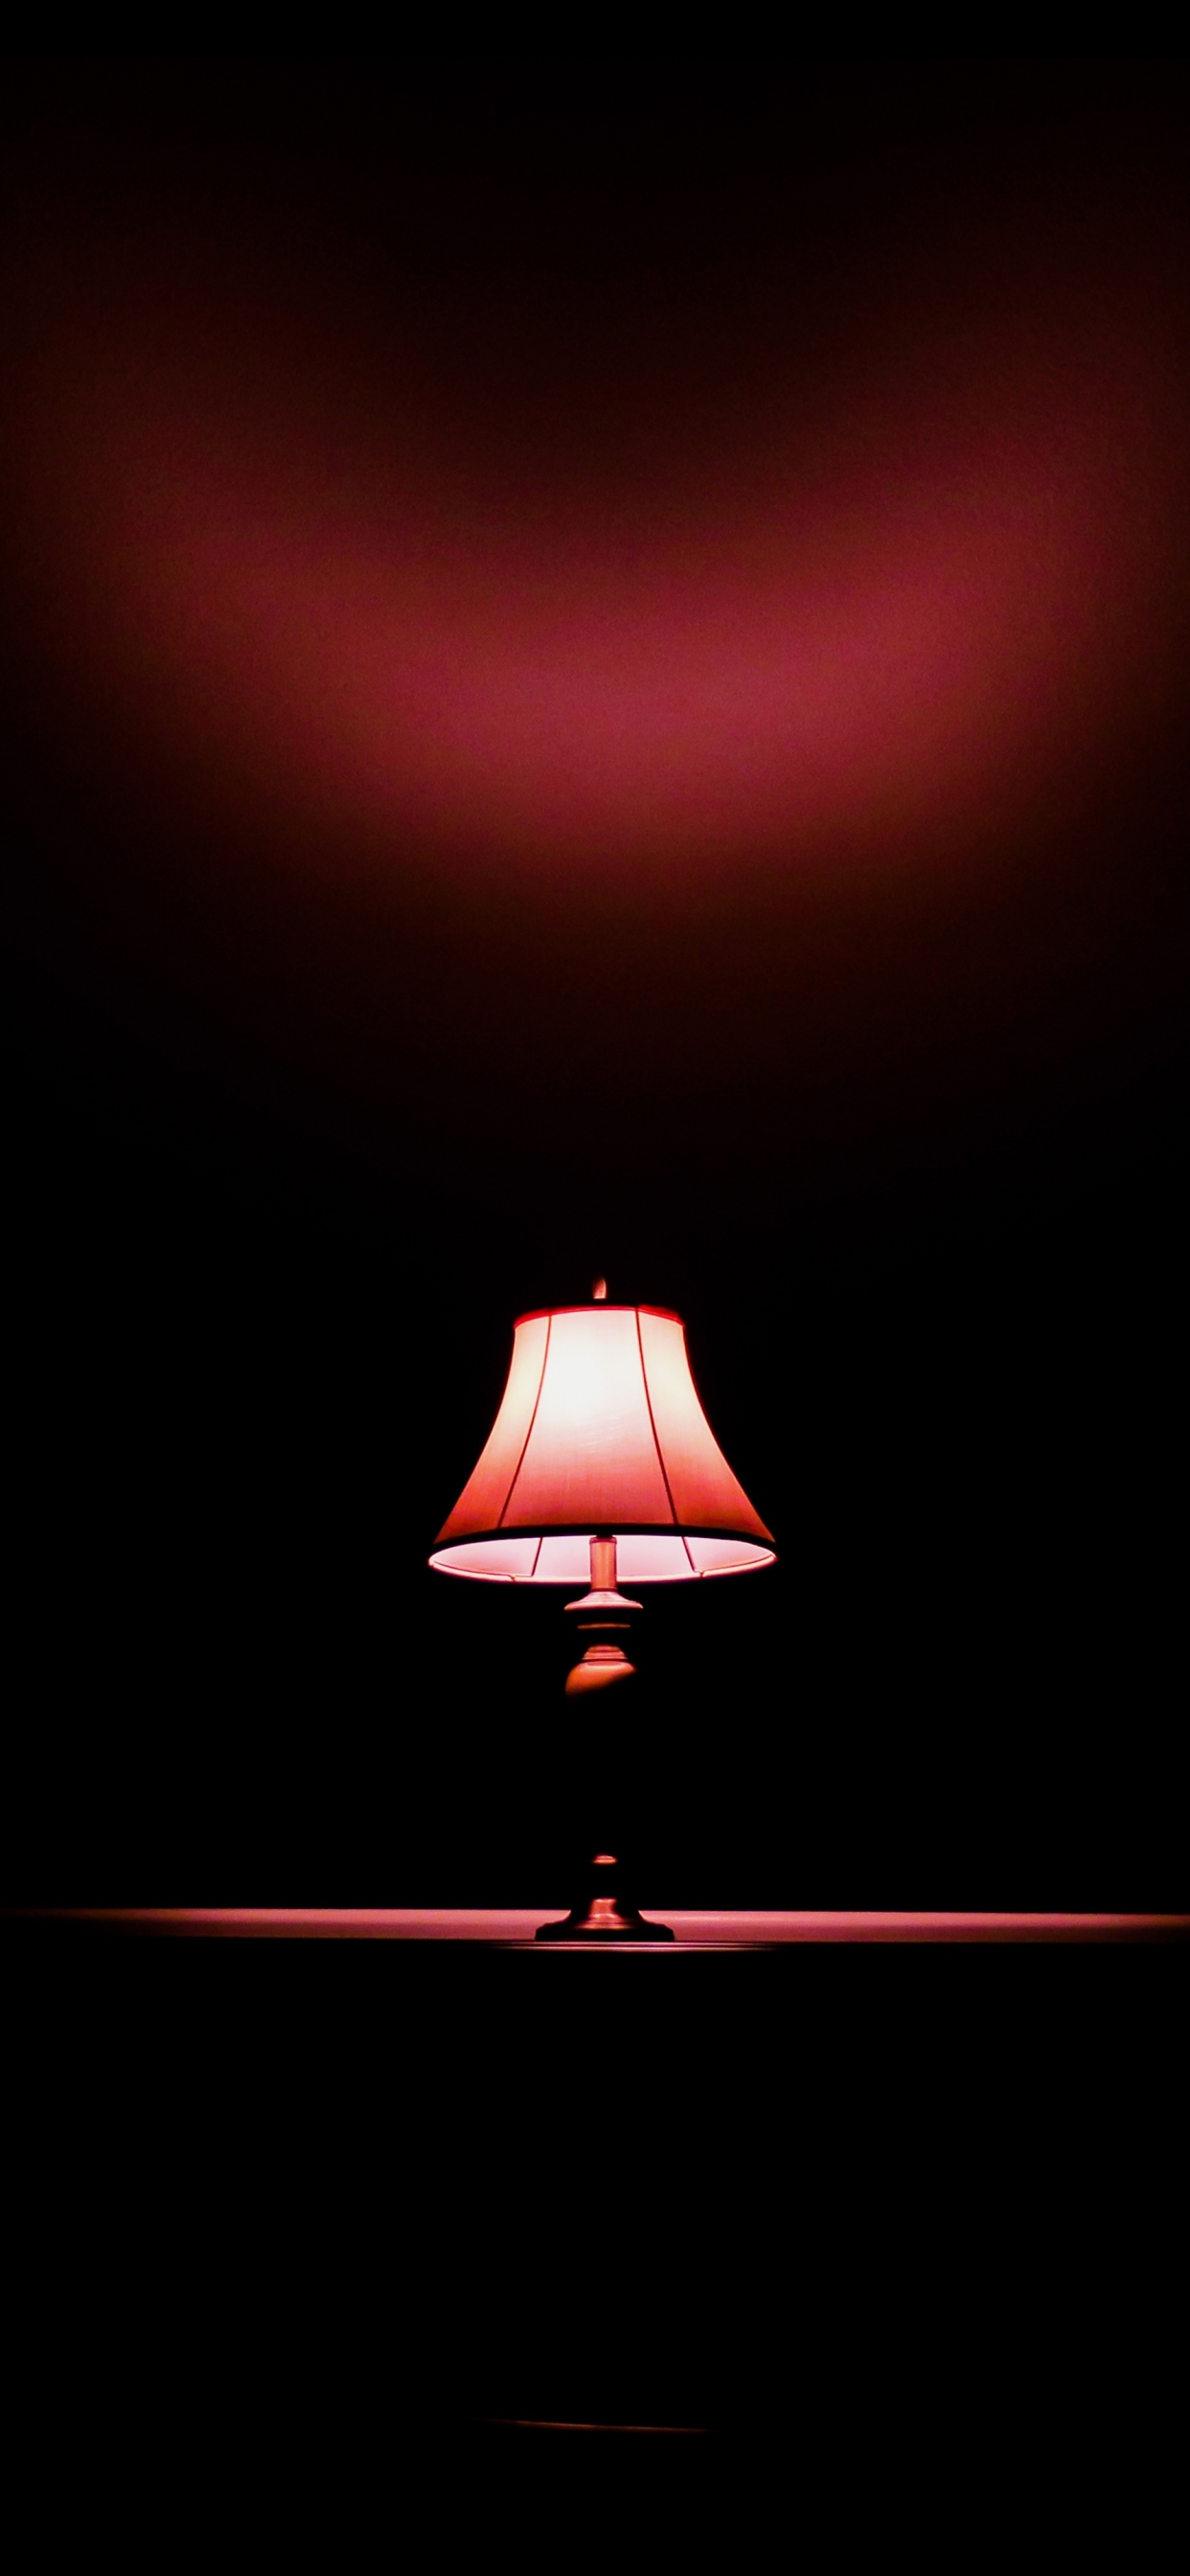 A lamp is turned on in a dark room. - Light red